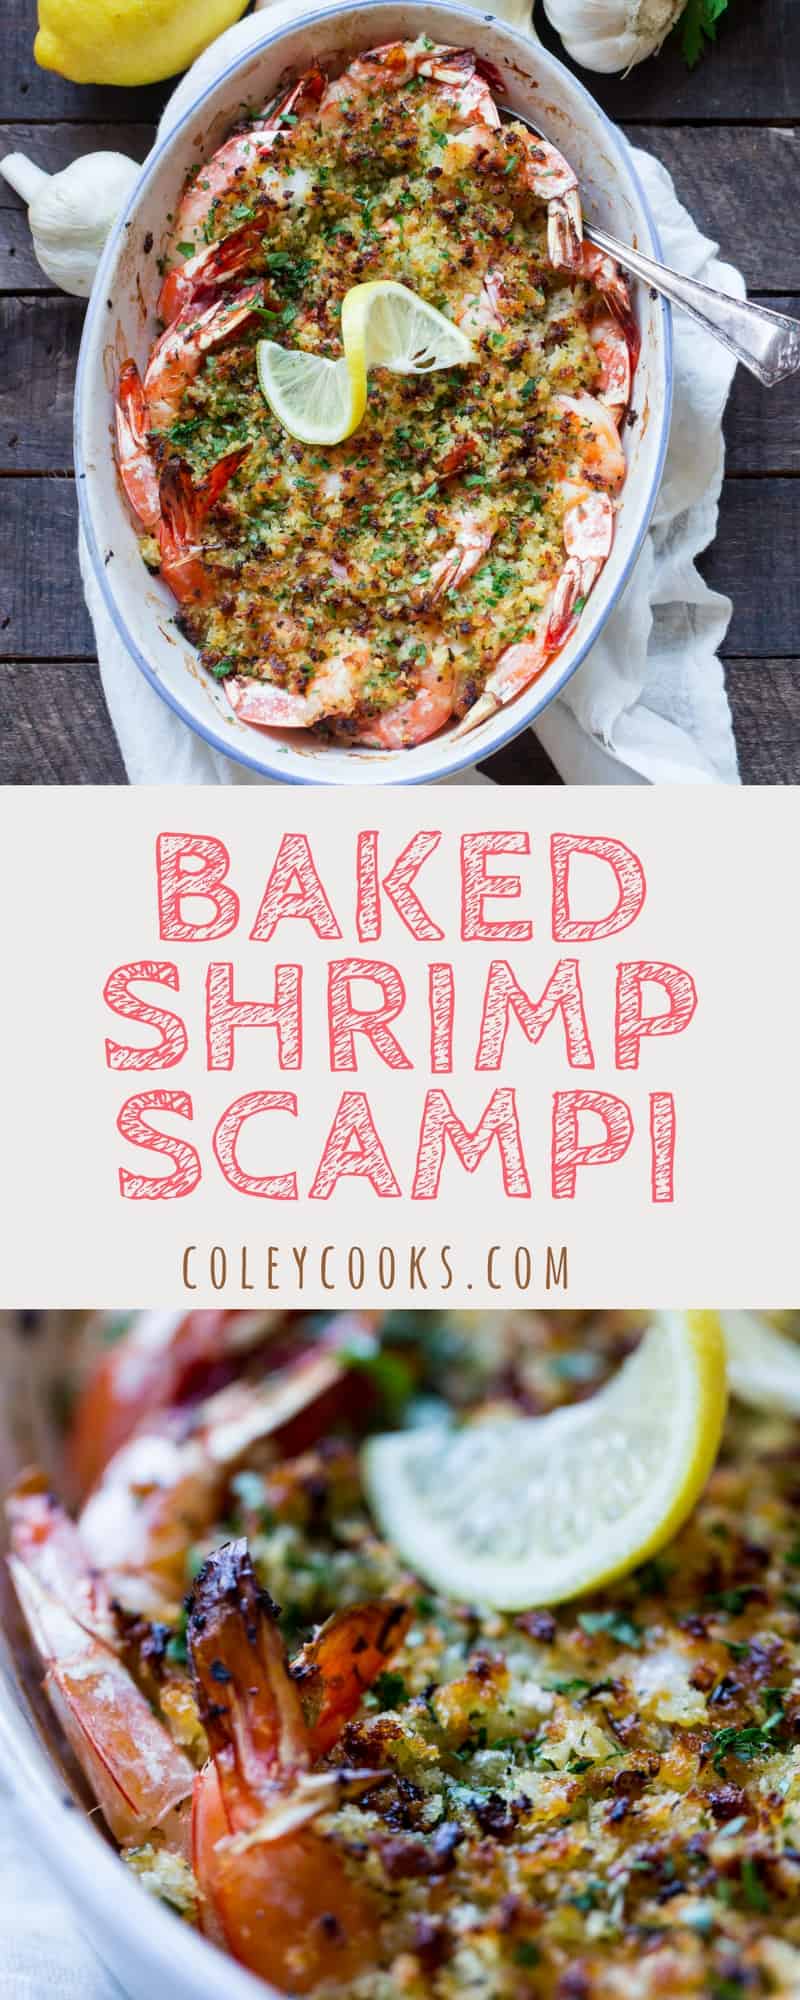 BAKED SHRIMP SCAMPI | Lemony, Buttery, Perfectly Cooked Shrimp with Crispy Herbed Breadcrumbs. SO Delicious! | ColeyCooks.com